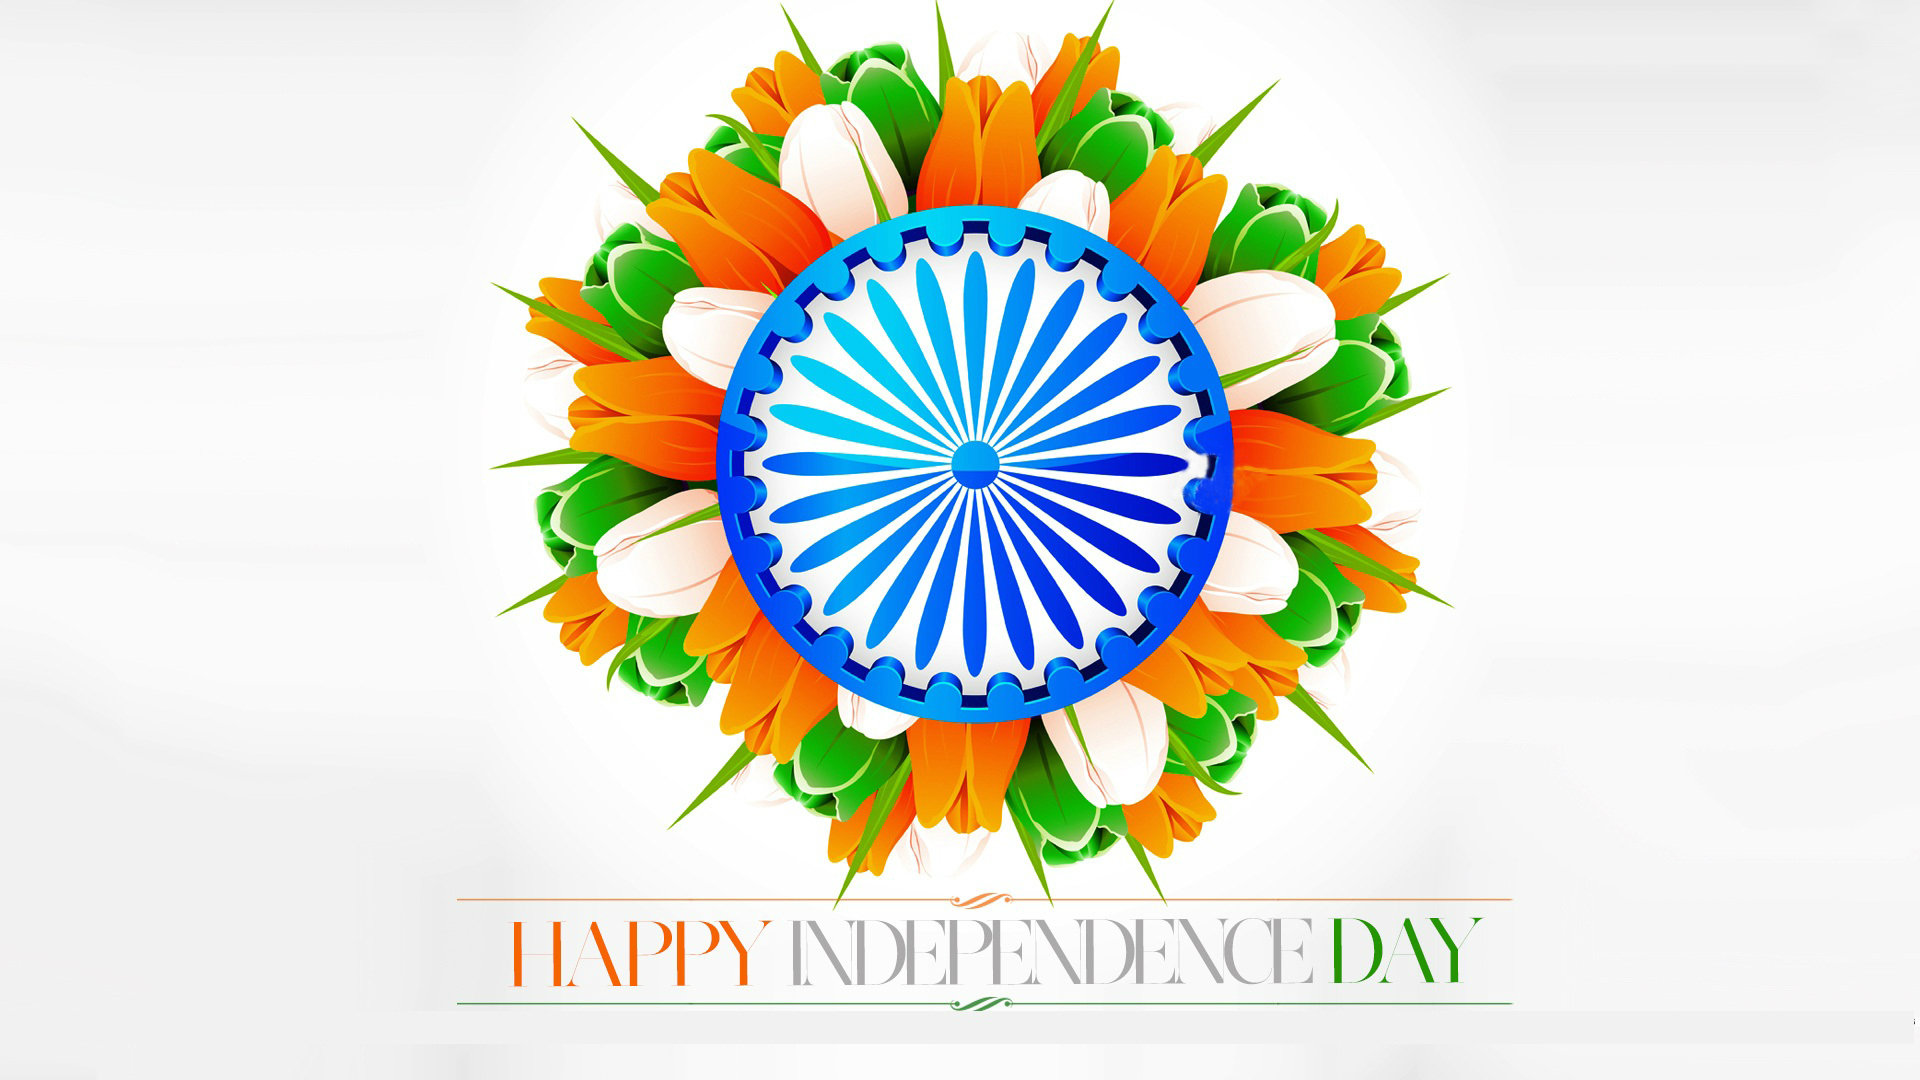 Happy Republic Day Flowers Orange White Green Image - Happy Independence Day 2019 - HD Wallpaper 